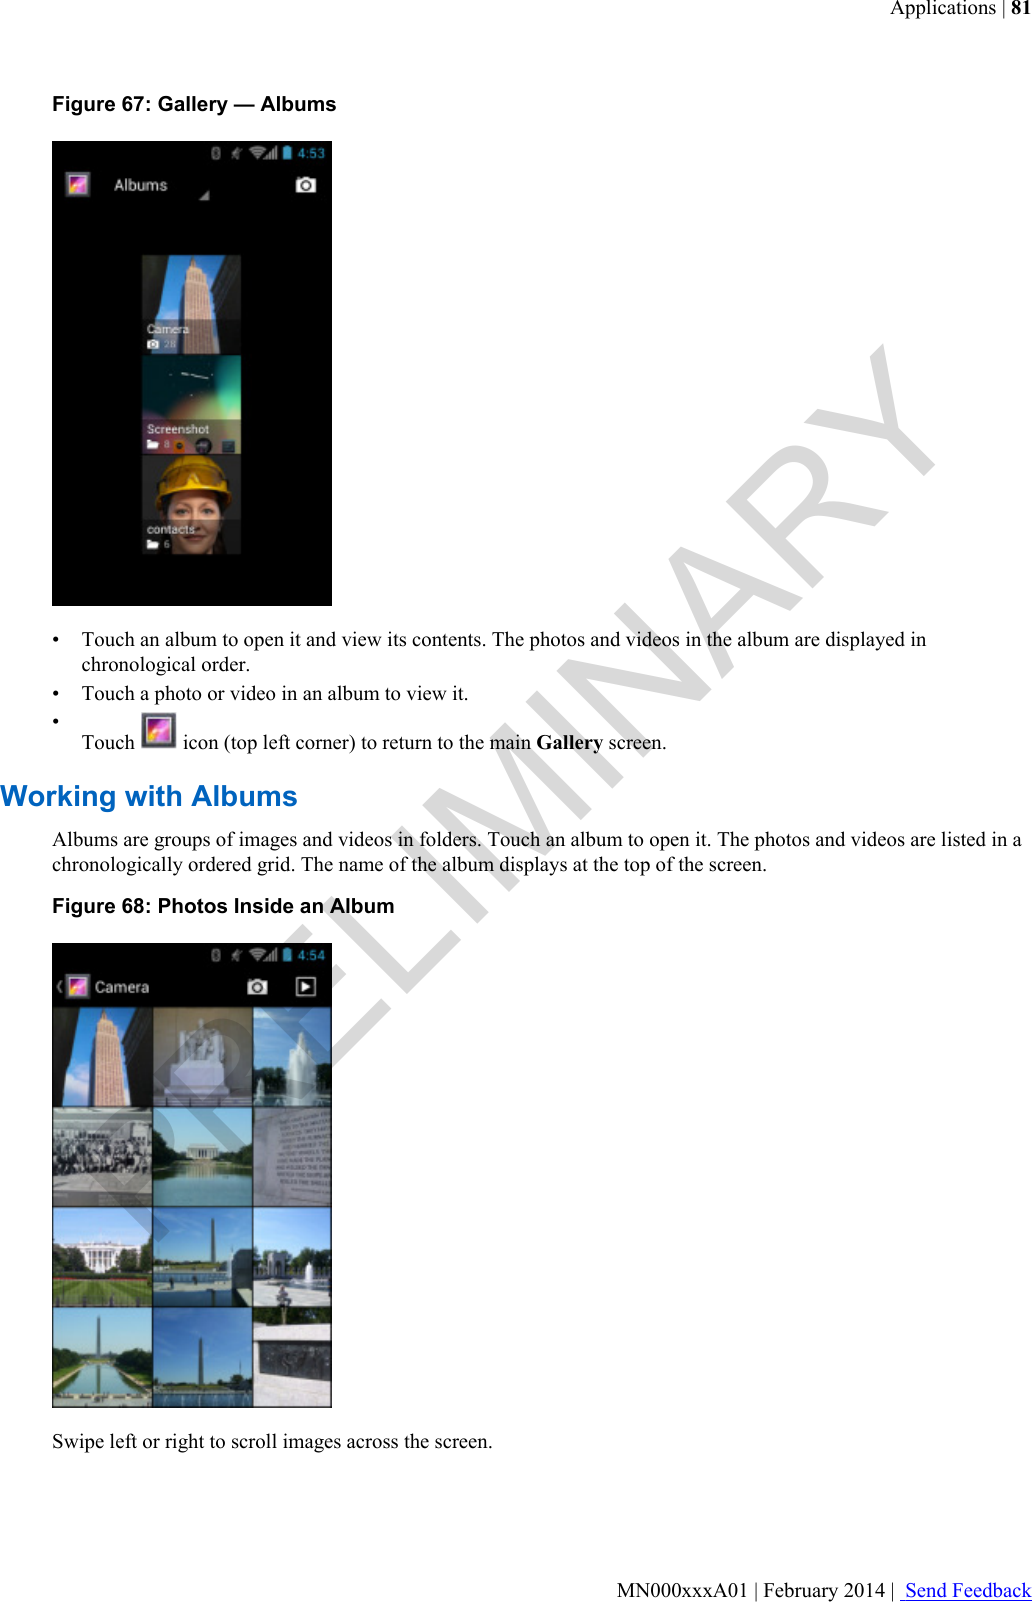 Figure 67: Gallery — Albums• Touch an album to open it and view its contents. The photos and videos in the album are displayed inchronological order.• Touch a photo or video in an album to view it.•Touch   icon (top left corner) to return to the main Gallery screen.Working with AlbumsAlbums are groups of images and videos in folders. Touch an album to open it. The photos and videos are listed in achronologically ordered grid. The name of the album displays at the top of the screen.Figure 68: Photos Inside an AlbumSwipe left or right to scroll images across the screen.Applications | 81MN000xxxA01 | February 2014 |  Send FeedbackPRELIMINARY